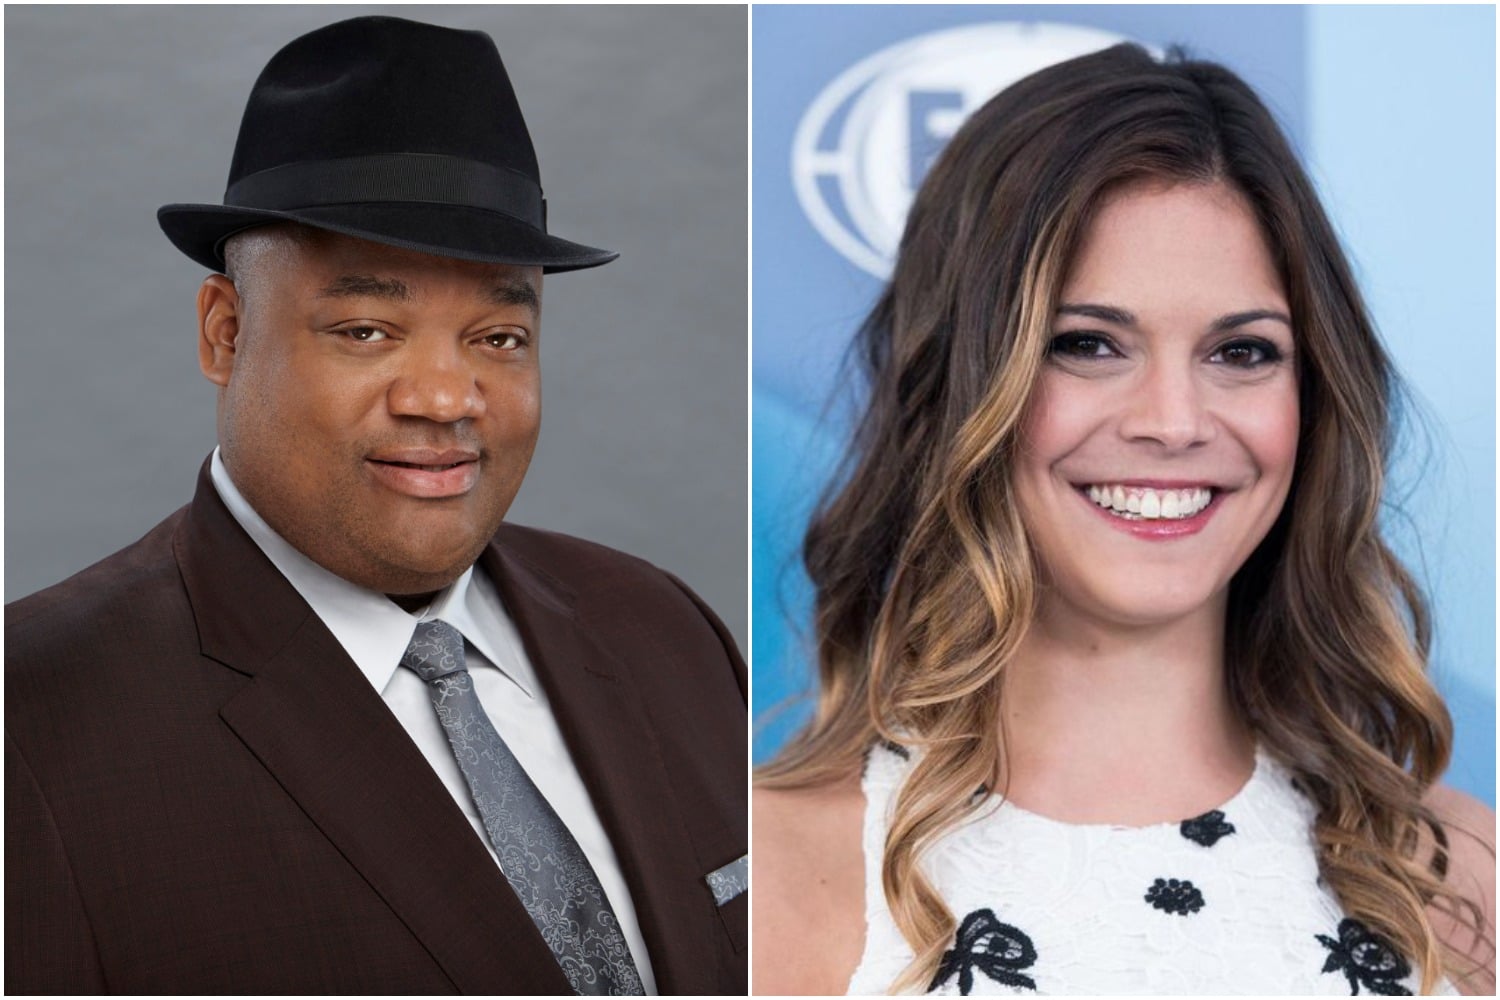 Buried in the Jason Whitlock vs. Katie Nolan Feud is an Interesting